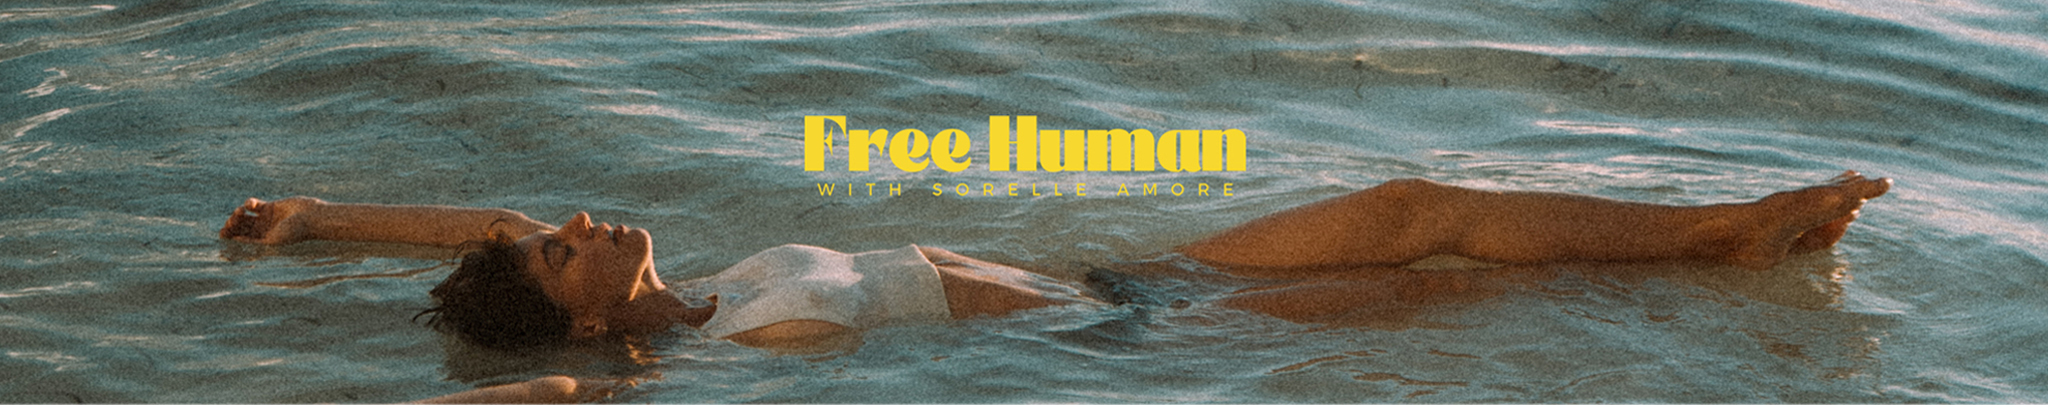 Free Human Podcast with Sorelle Amore